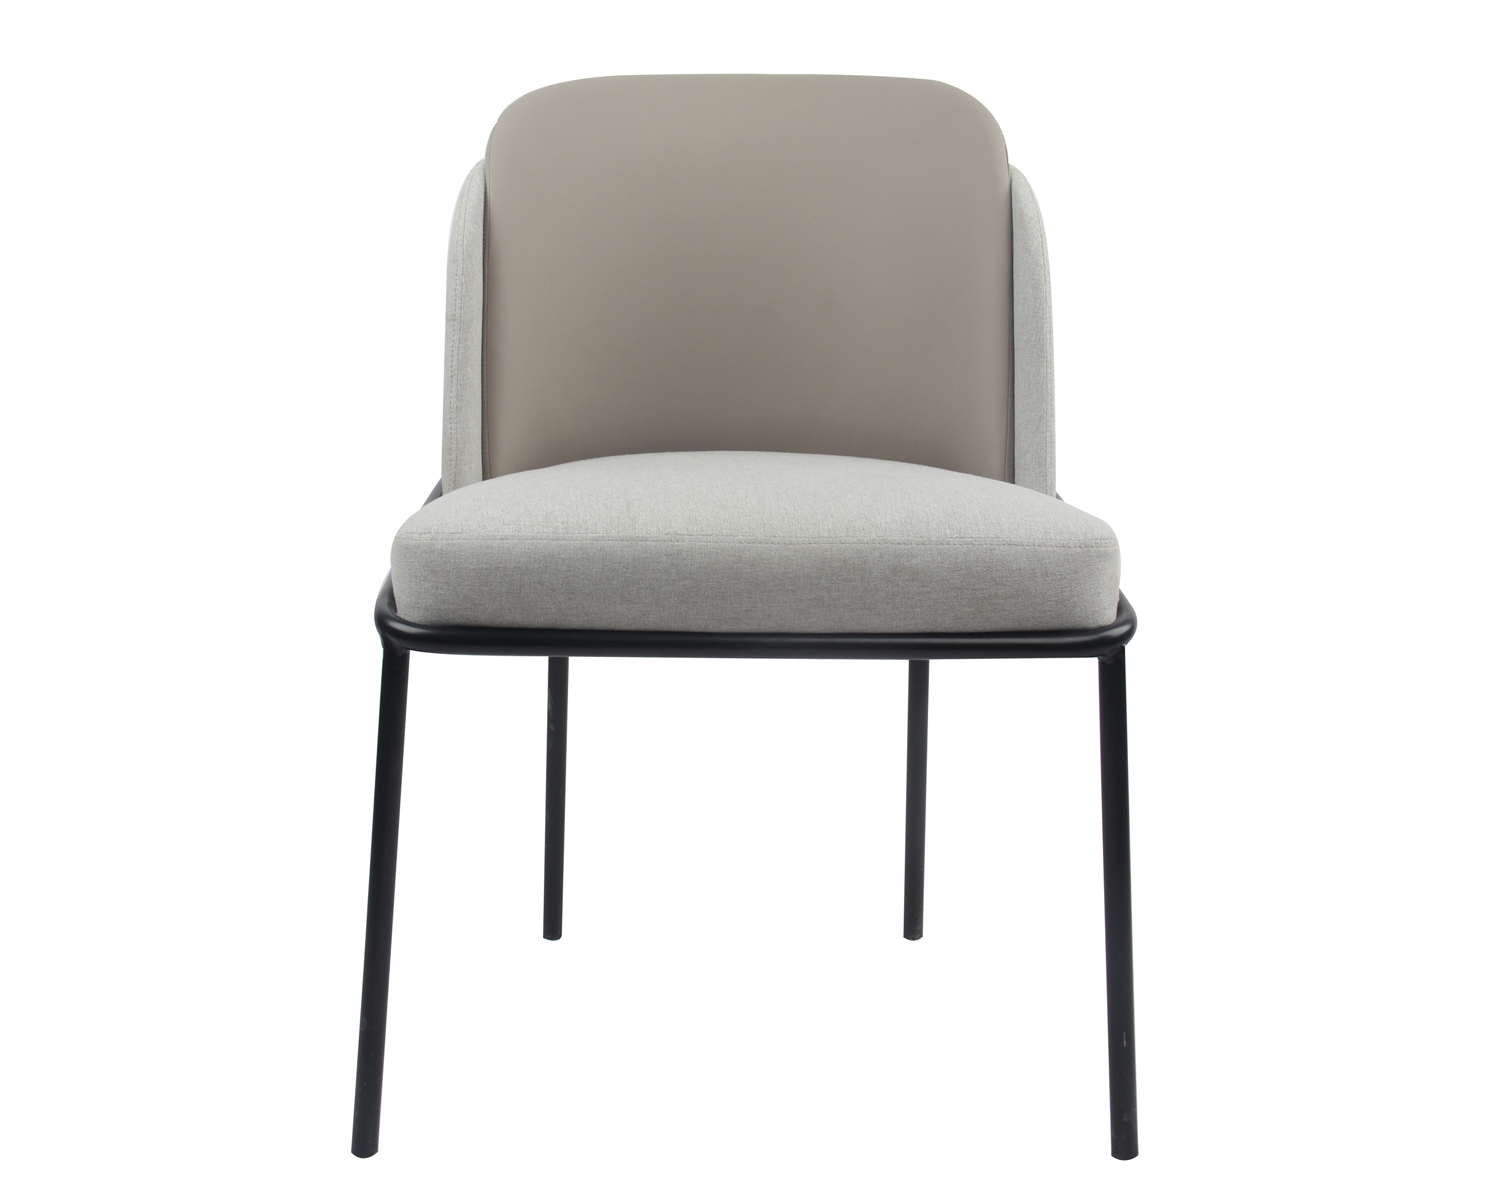 PU Seat Chair with Metal Legs for Kitchen Dining Room